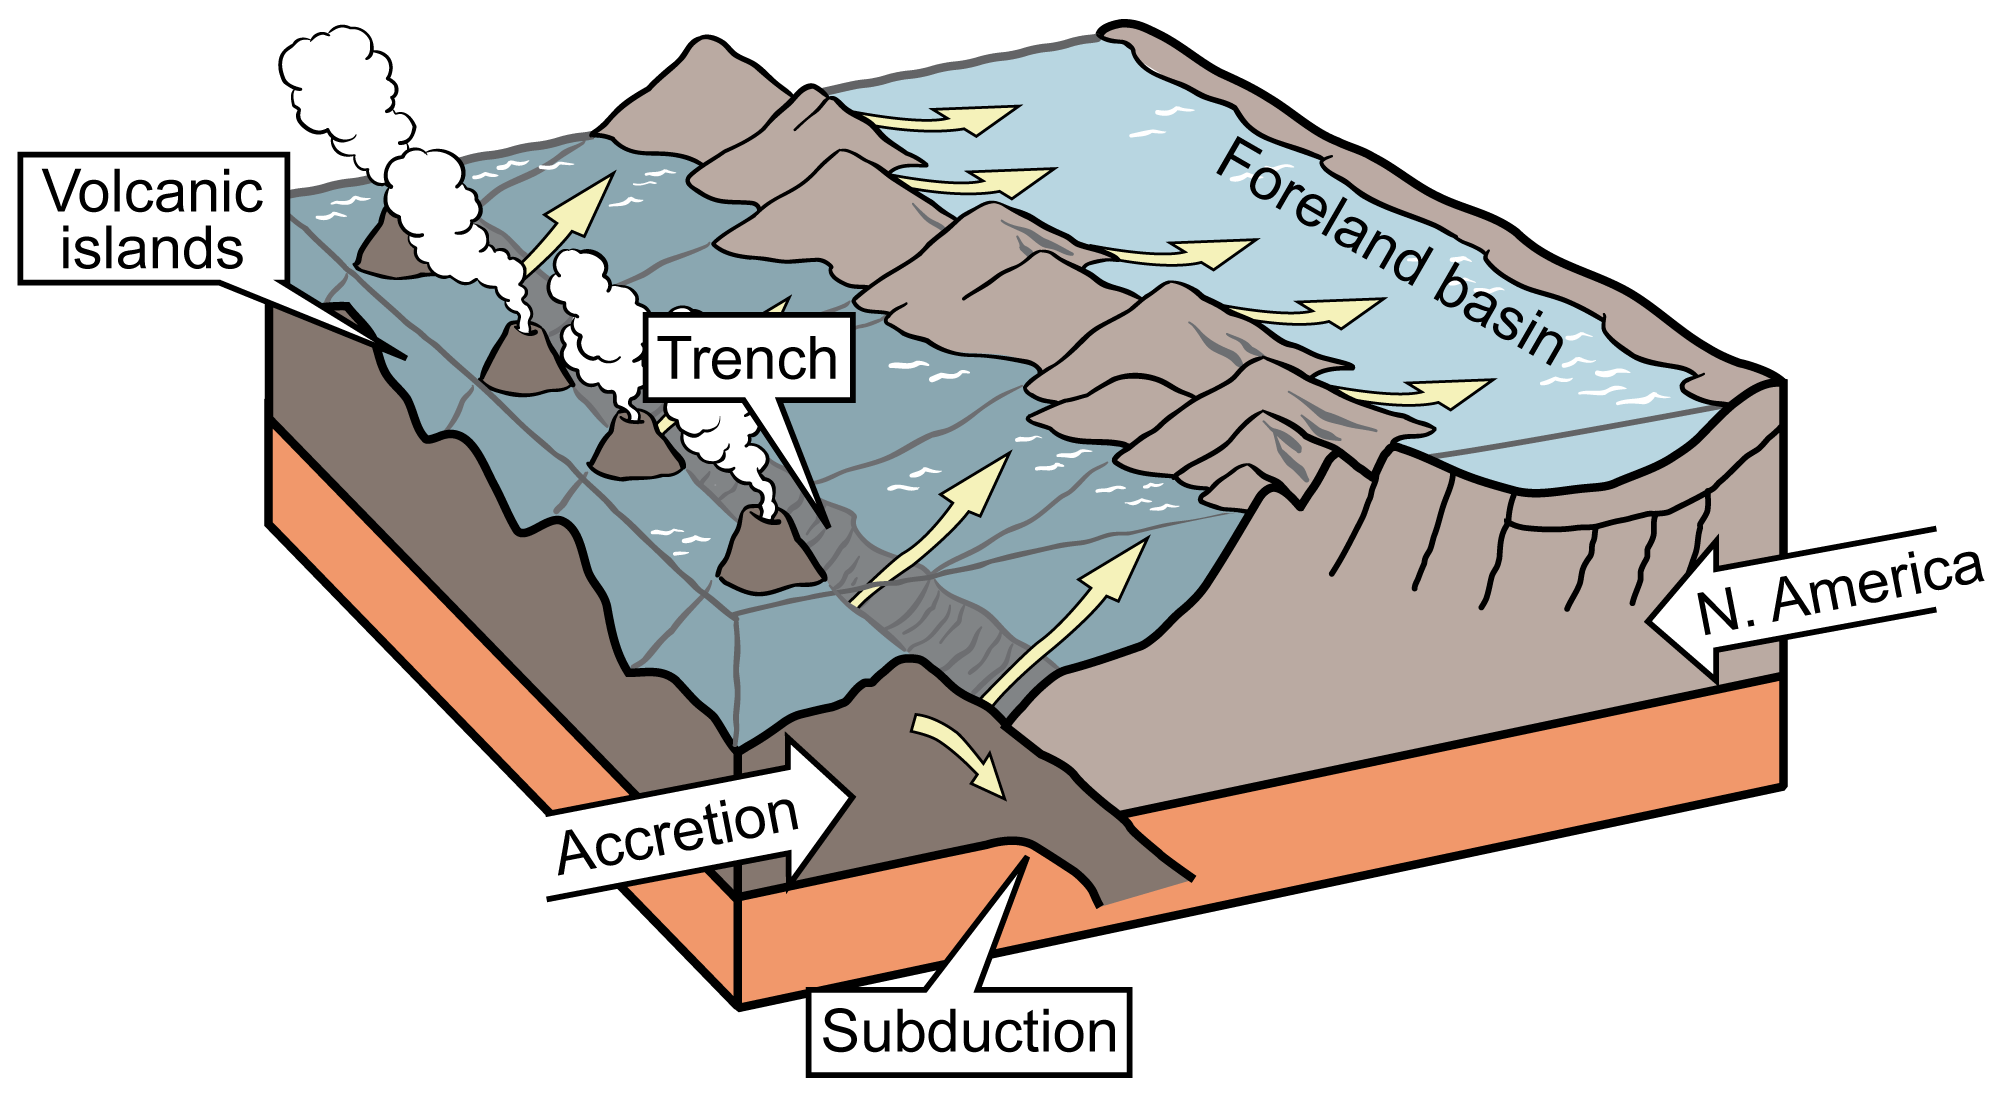 Diagram showing volcanic islands accreting to the side of the North American continent. The plate that the islands are on is being subducted beneath the North American plate. On the opposite side of the continental mountains from the subduction zone, downwarping of the continent has produced a foreland basin.